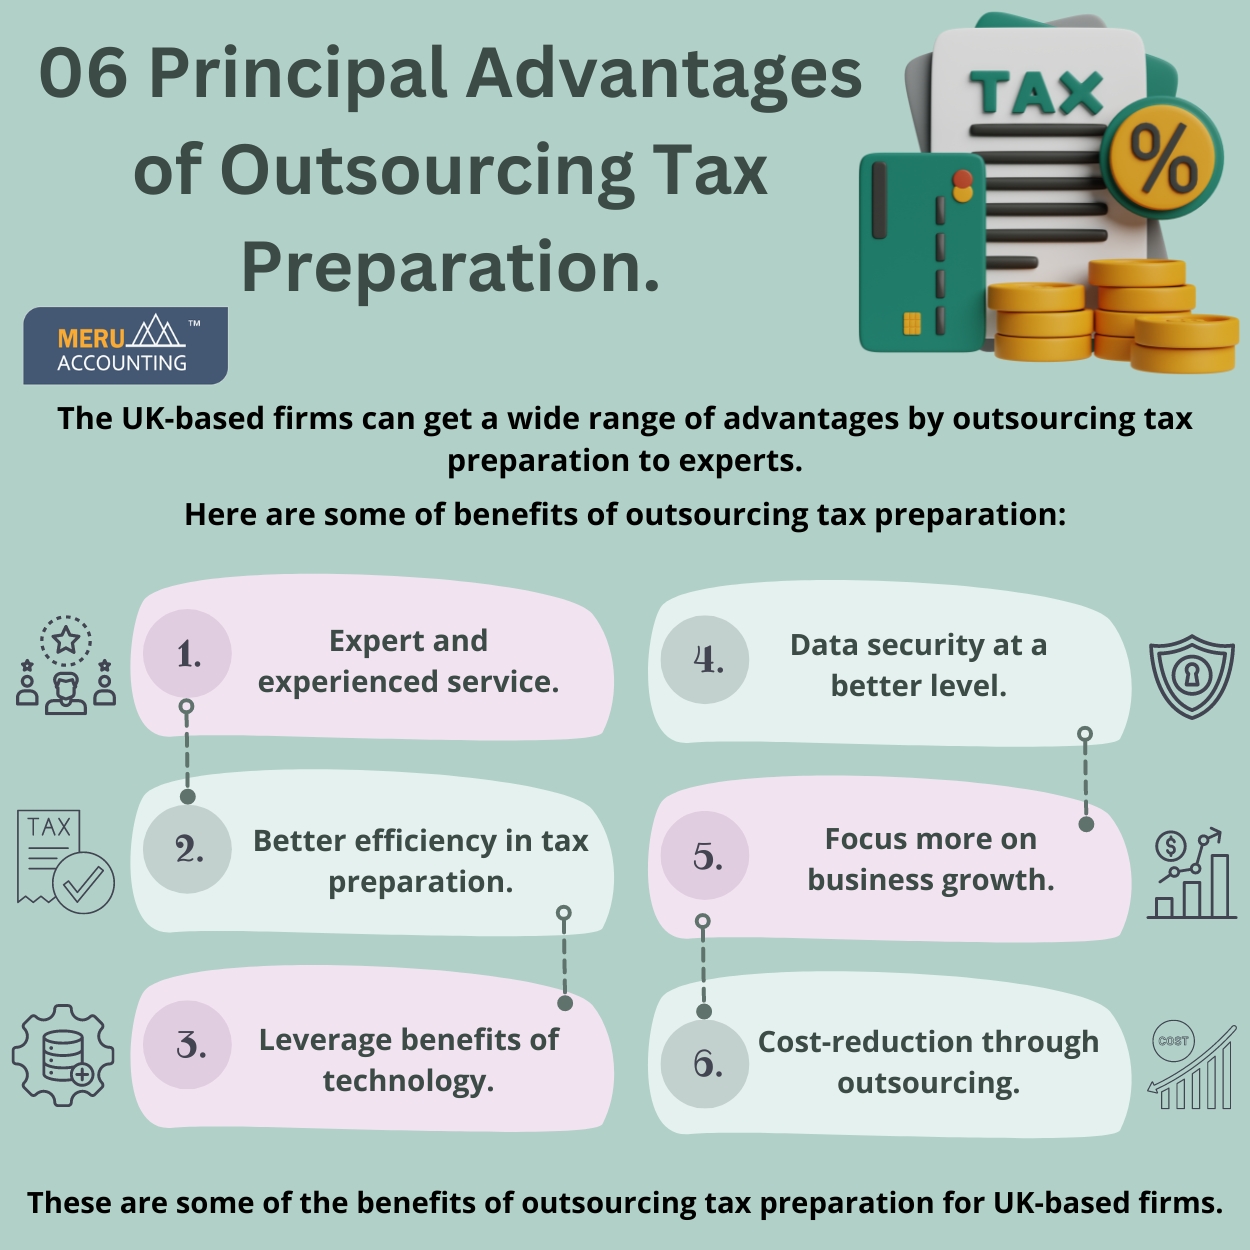 06 Principal Advantages of Outsourcing Tax Preparation size 1250 by 1250 v1 1